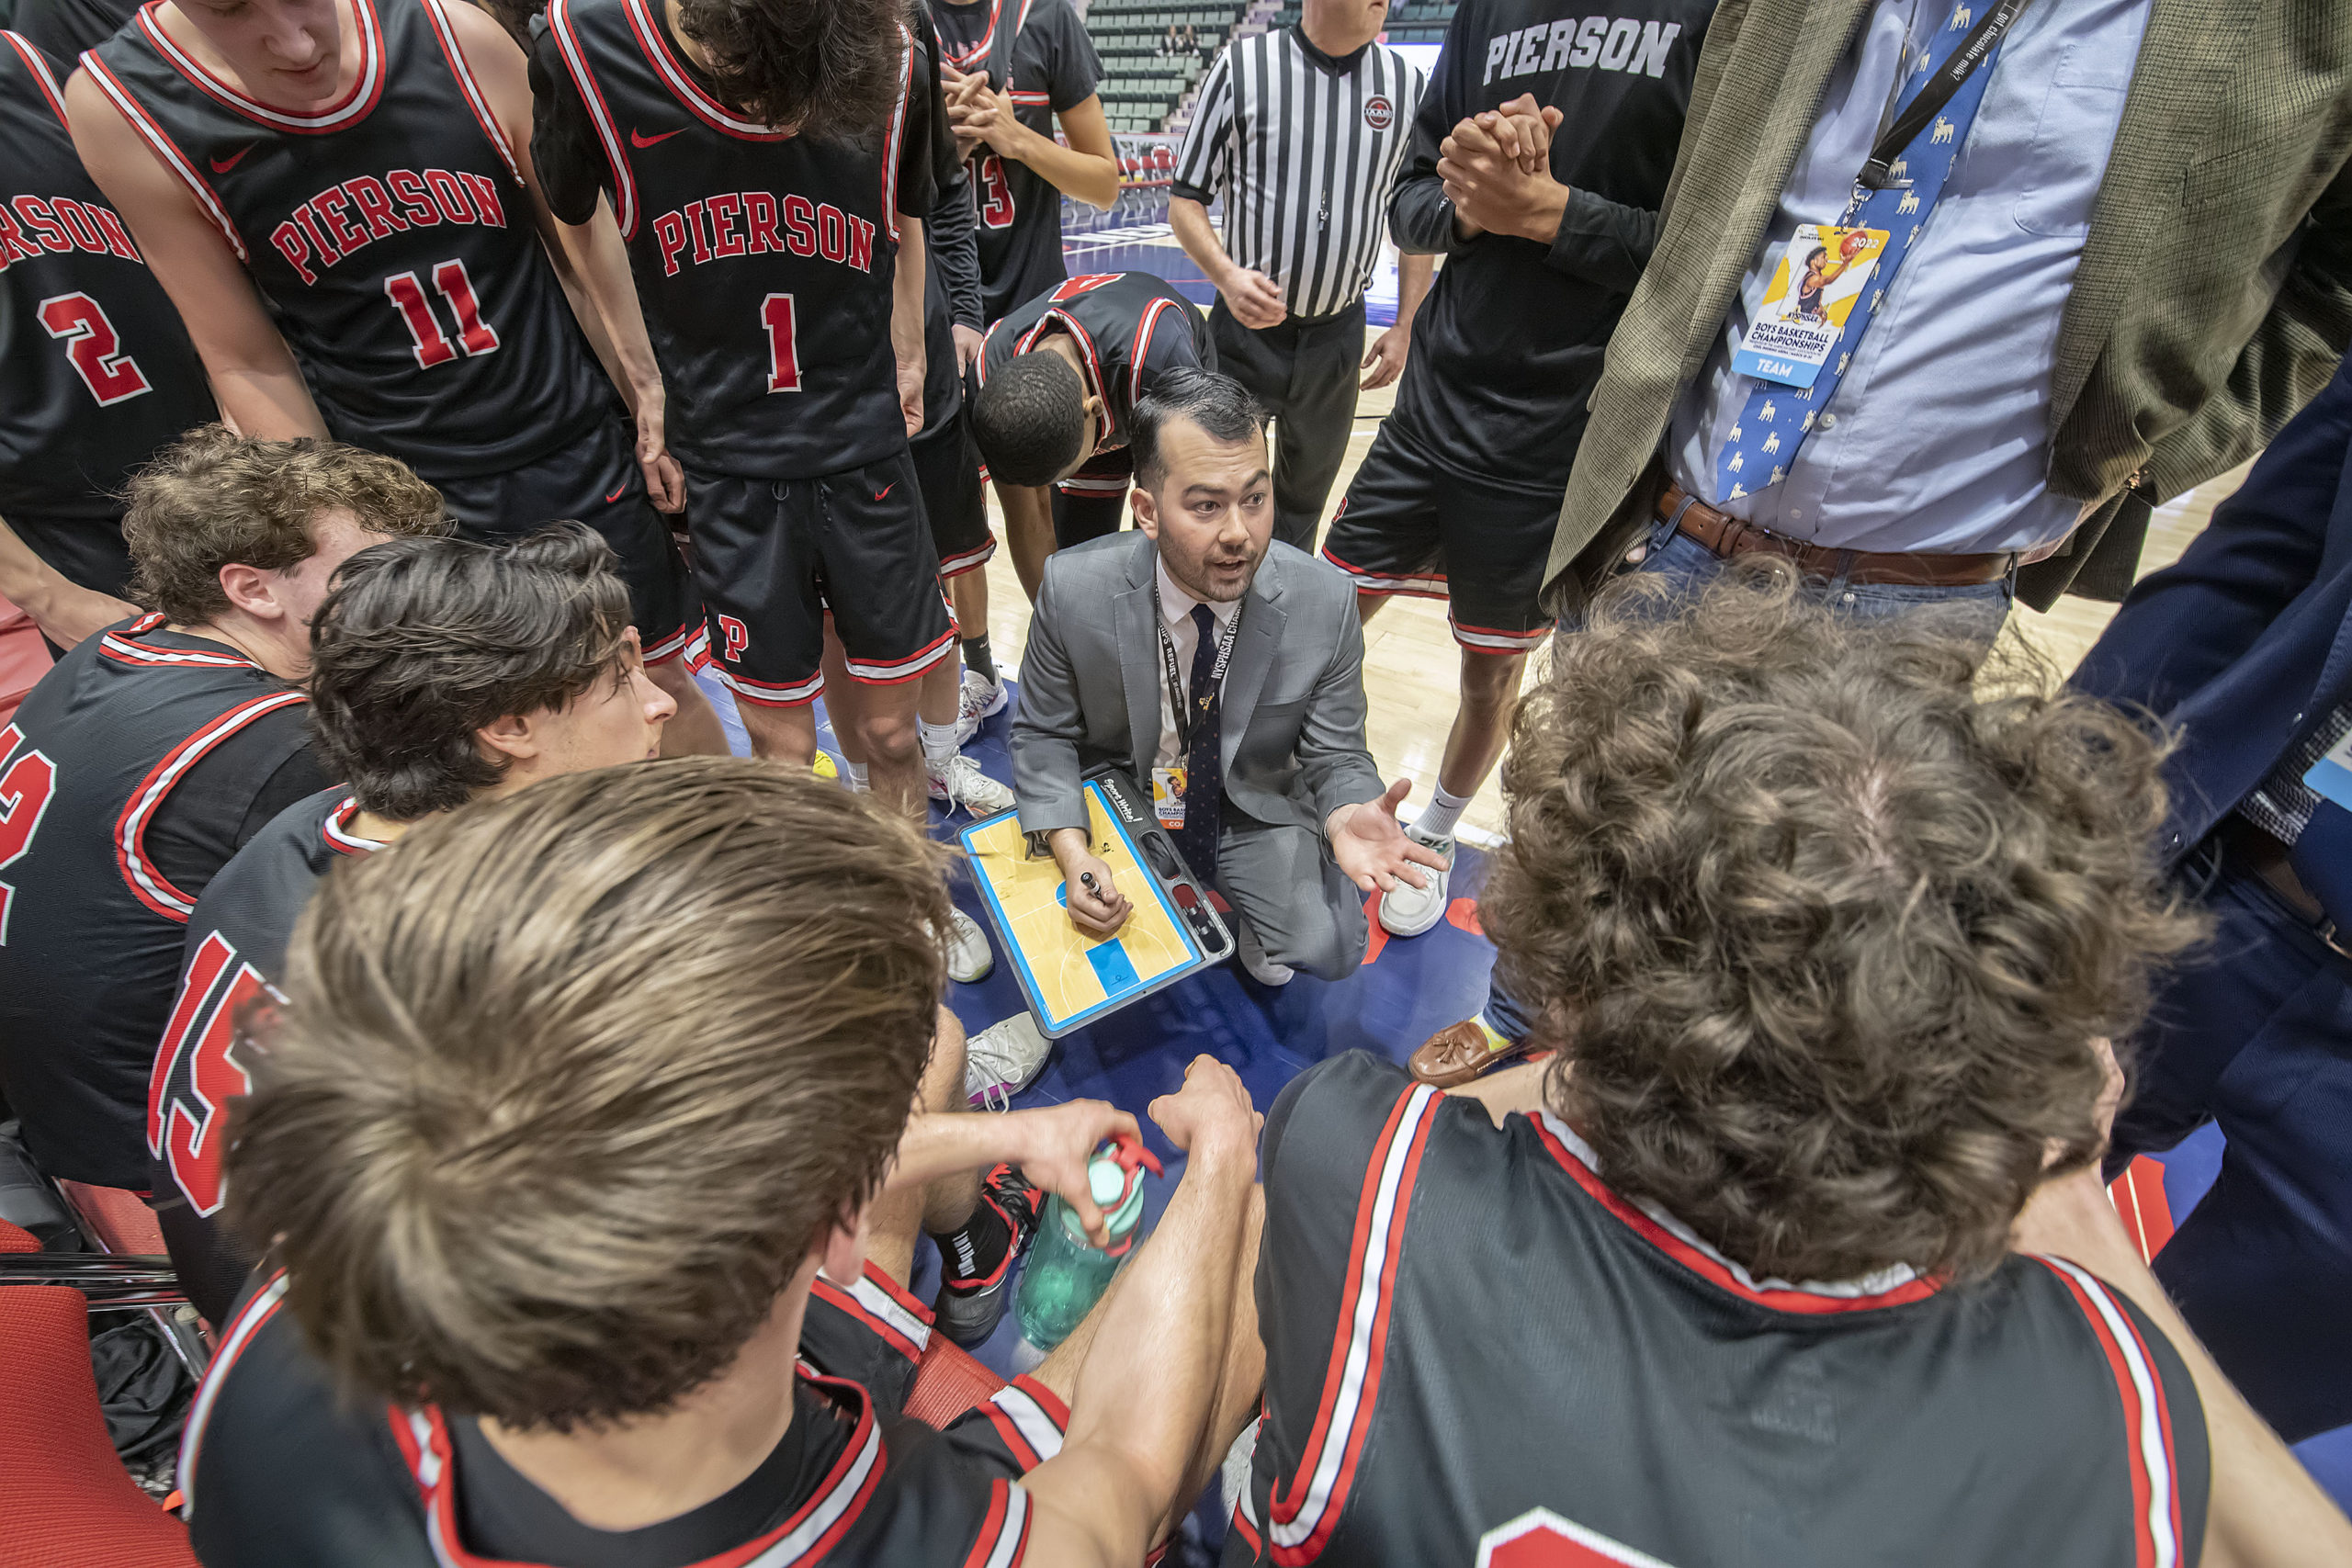 Pierson head coach Will Fujita draws up a play late in the game.    MICHAEL HELLER